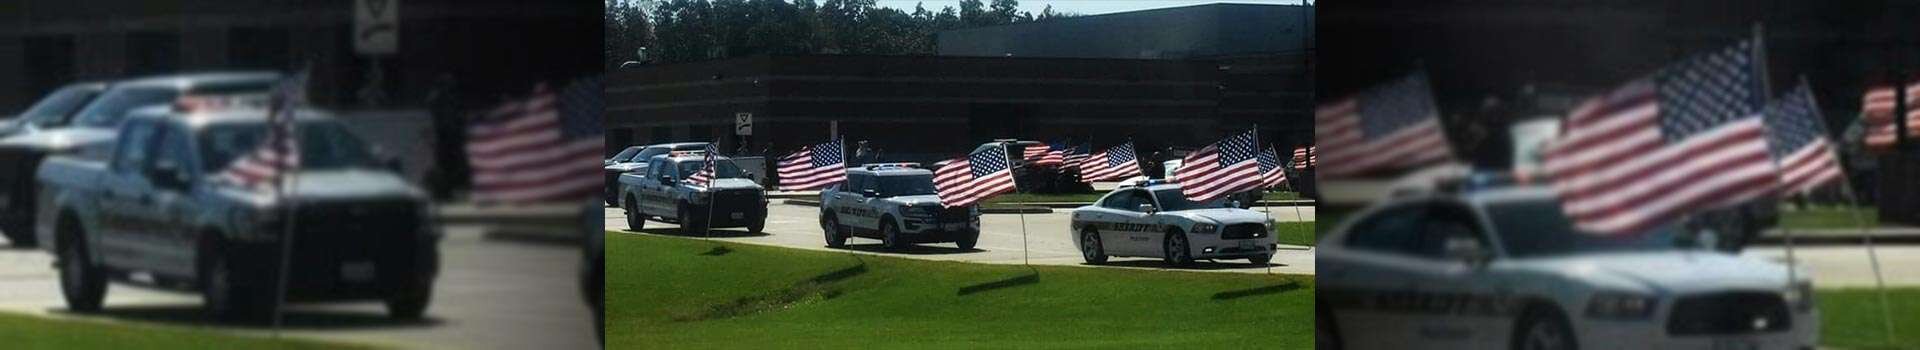 A parade of Polk County Sheriff vehicles driving next to a line of United States flags planted into the ground.